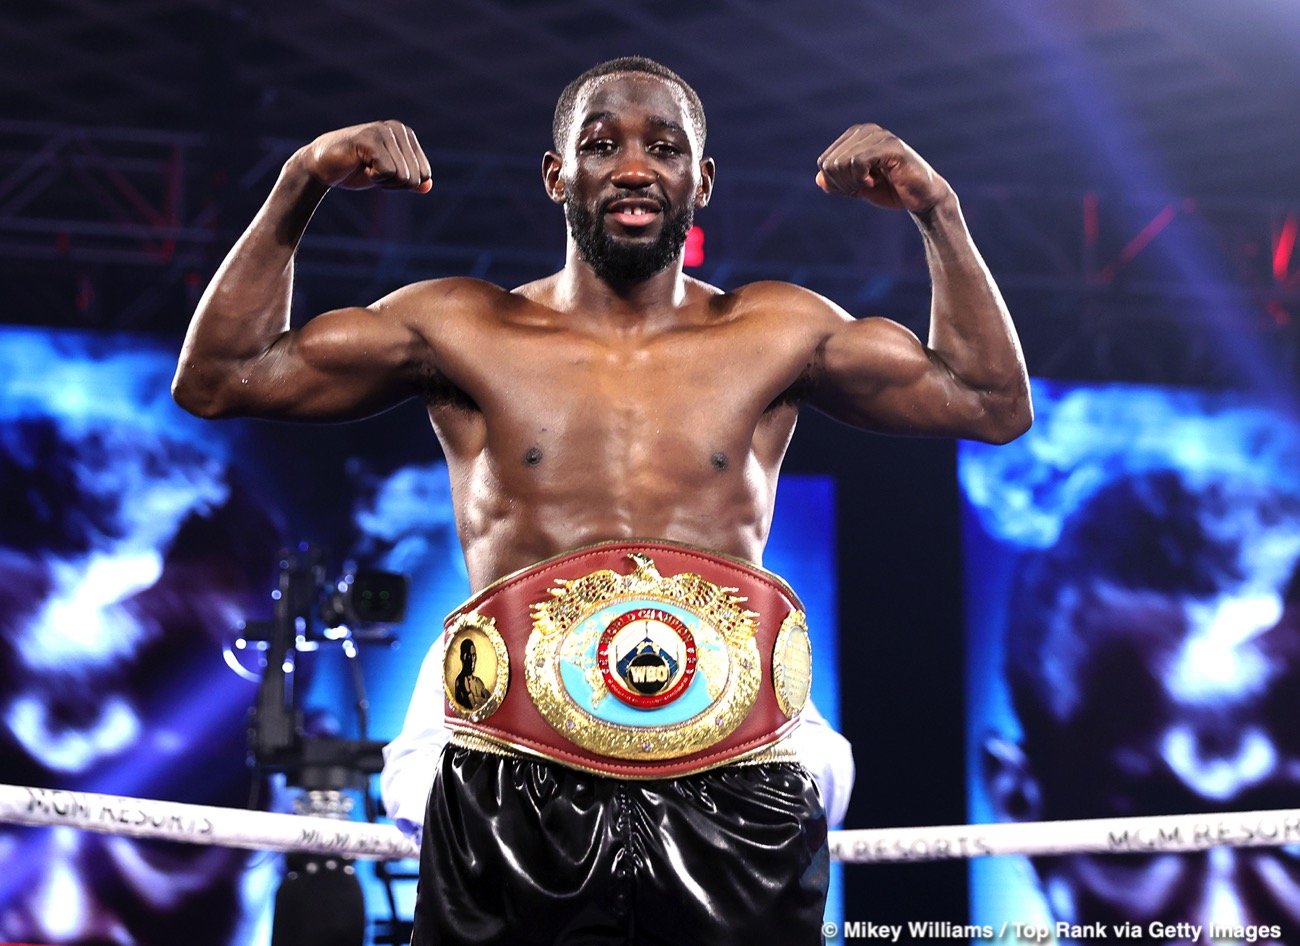 Image: Arum blasts Terence Crawford on his expiring contract: "Do we want to keep him?"